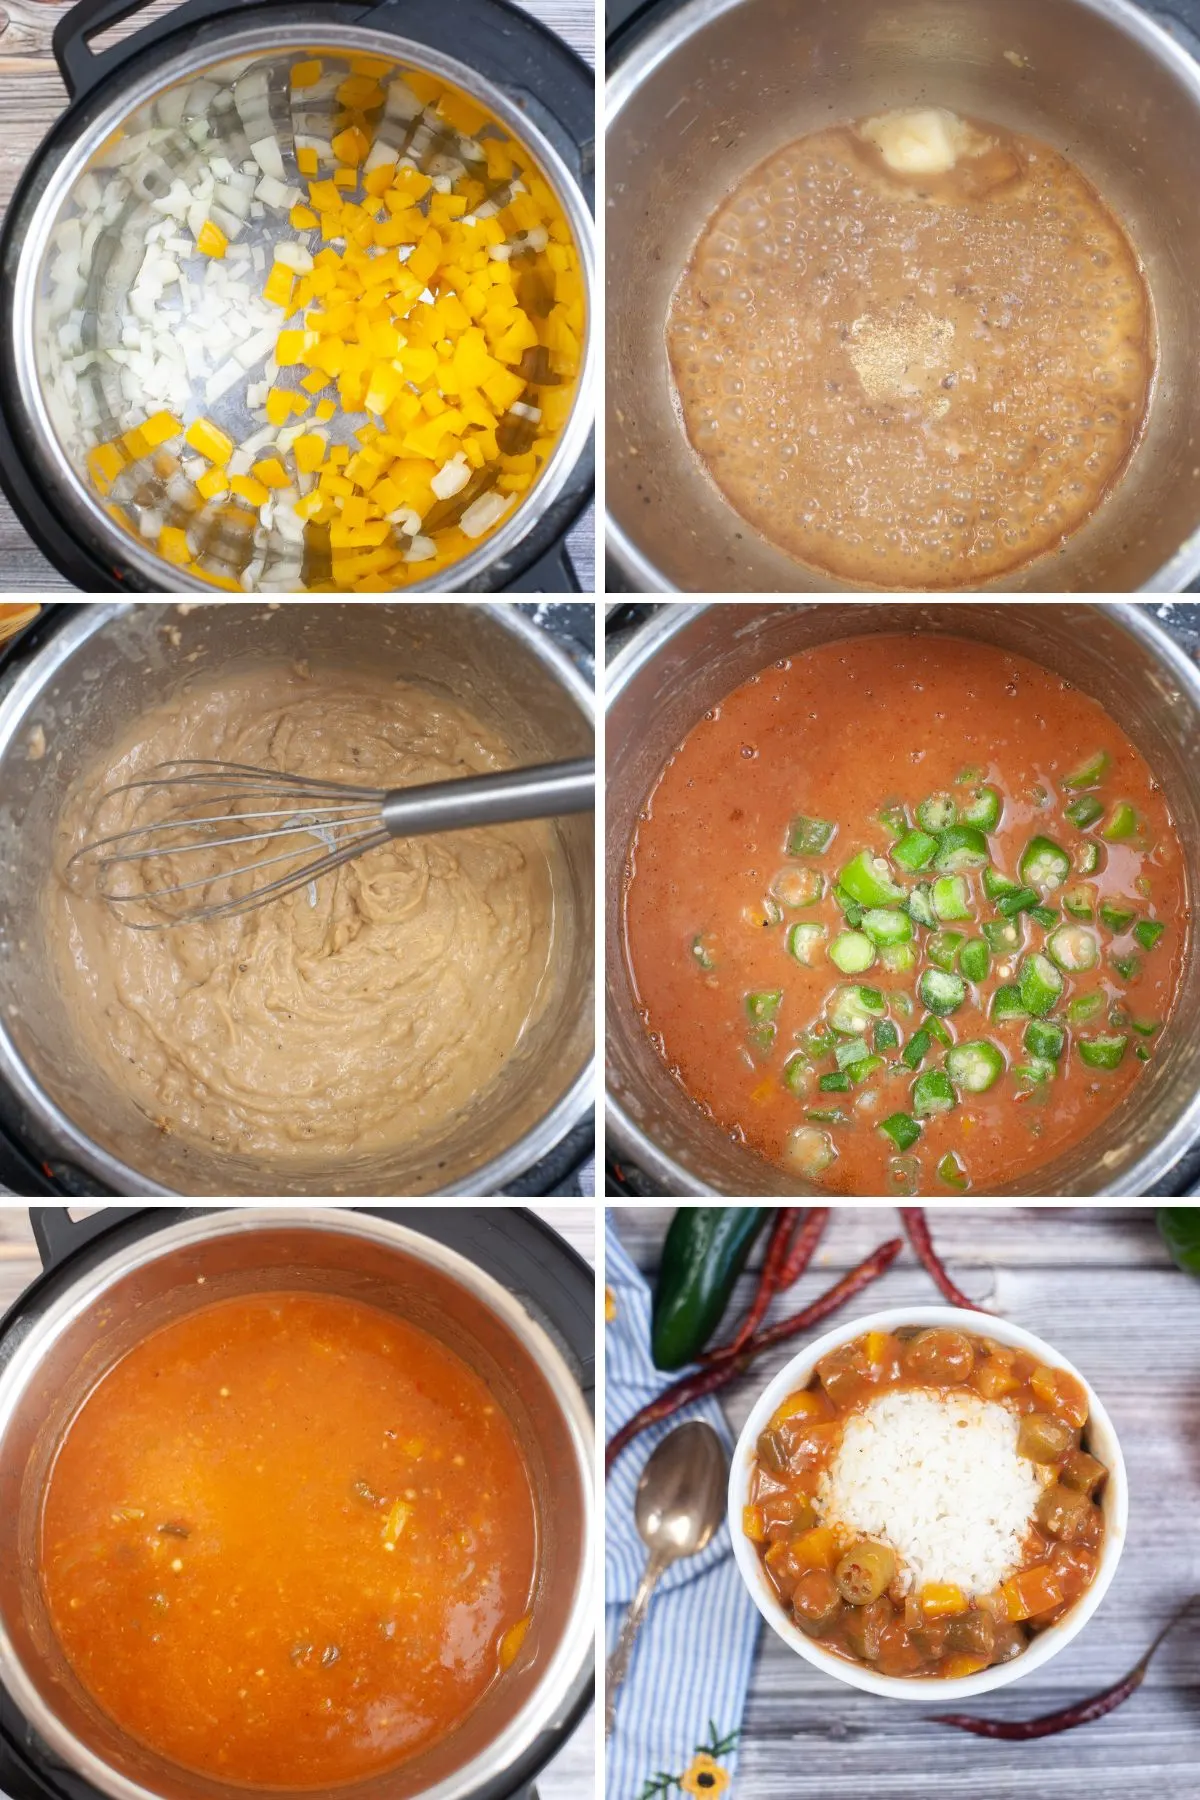 Collage of images showing how to make Instant Pot Gluten Free Gumbo.